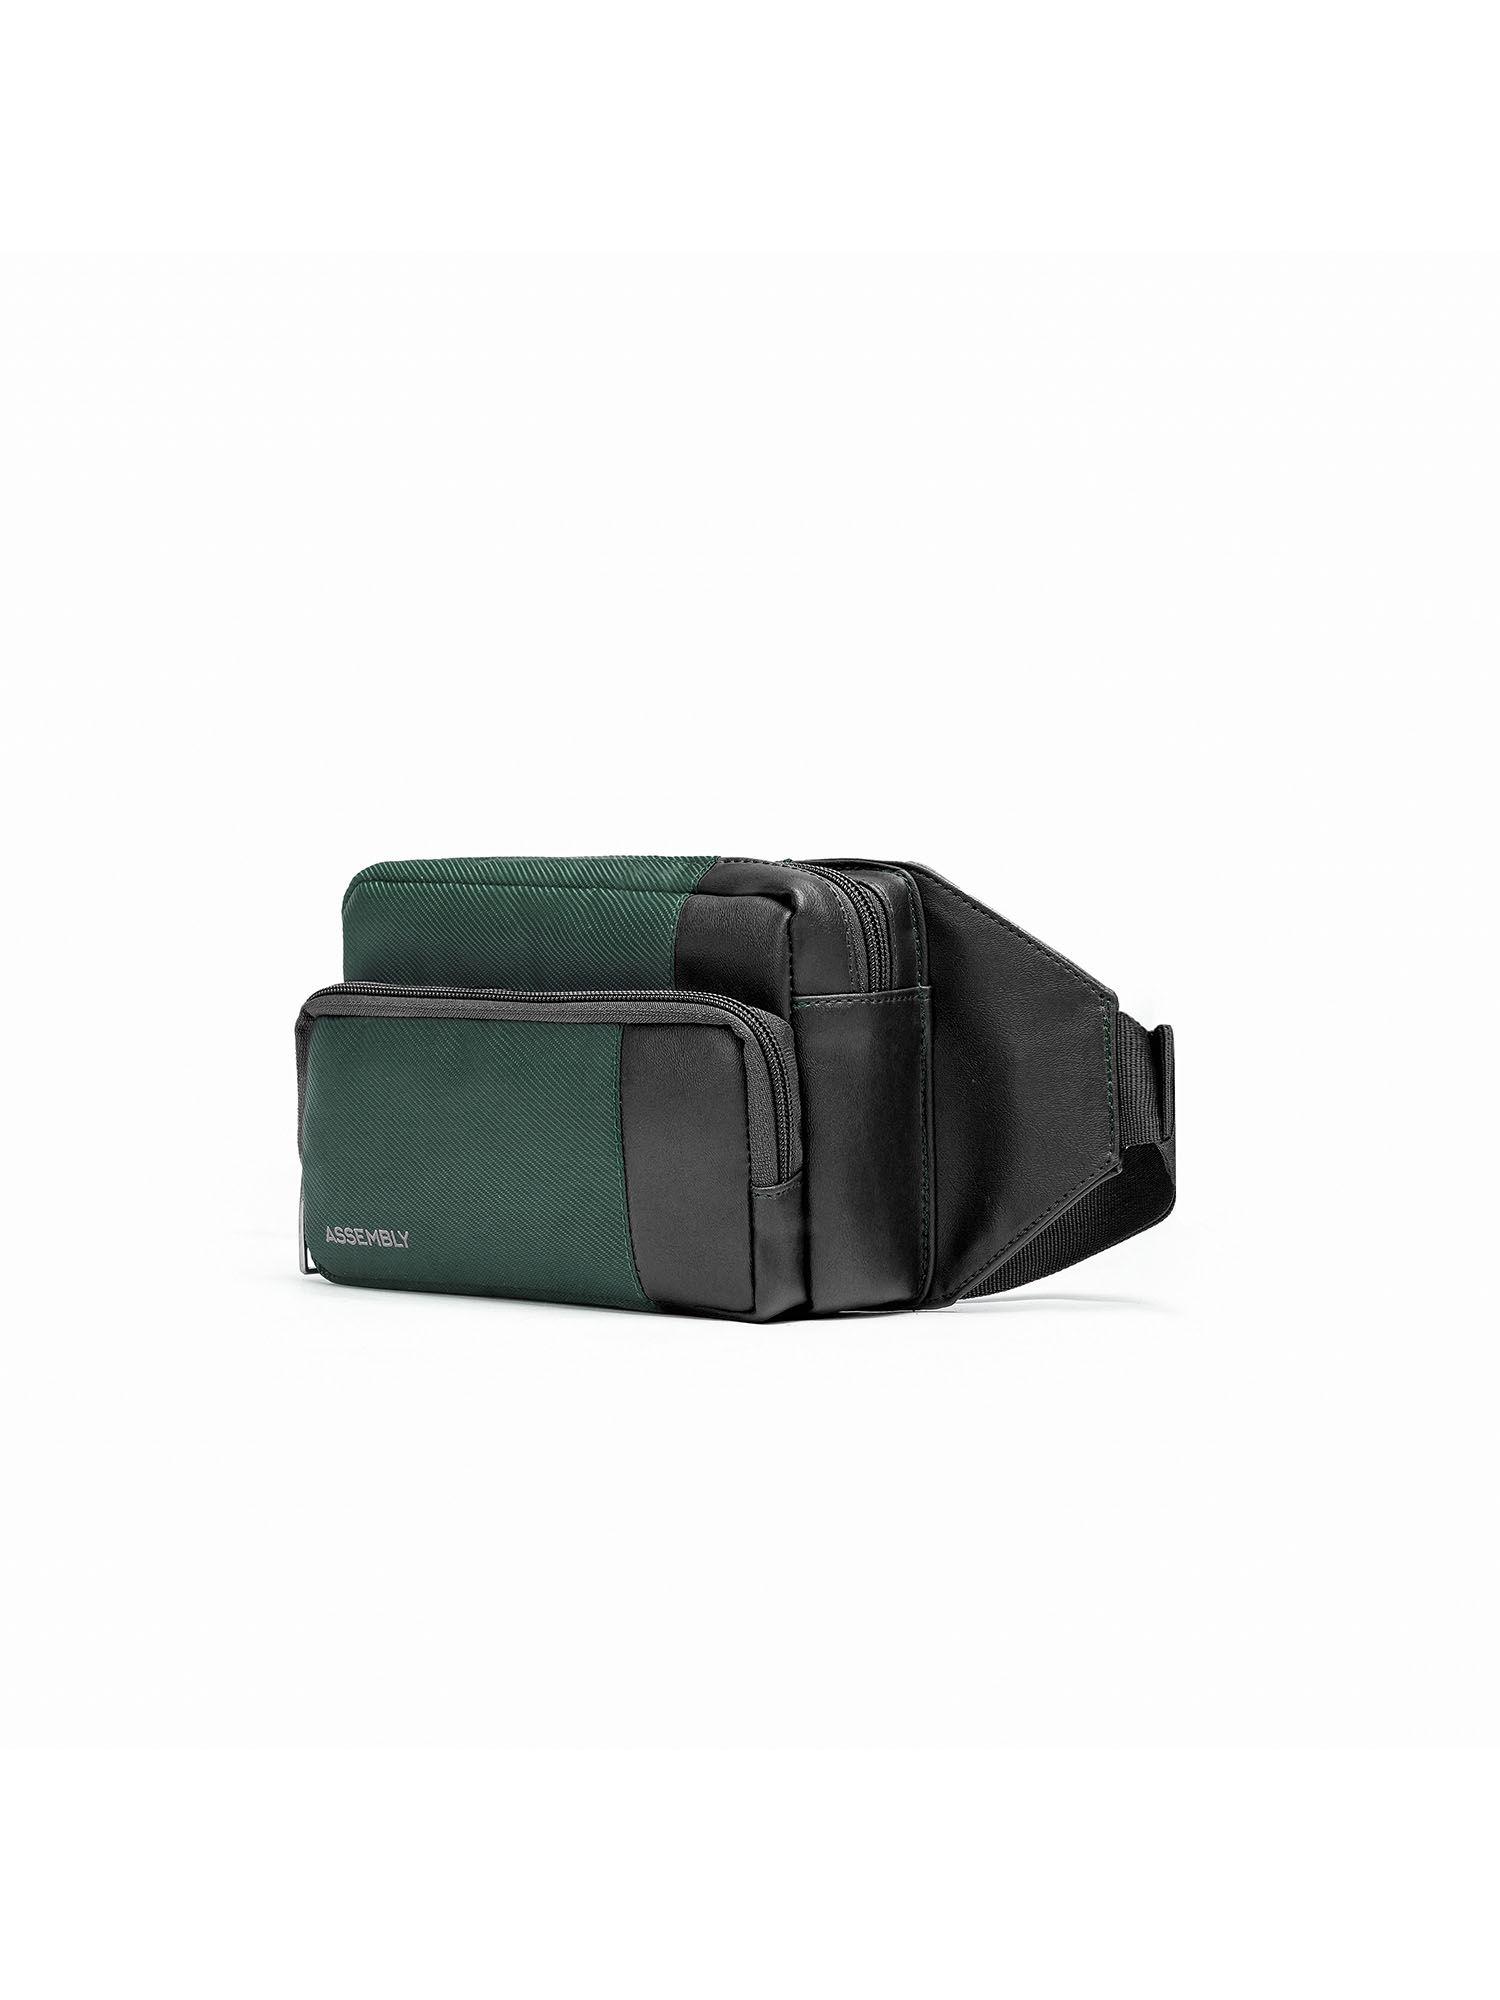 cross body fanny pack with adjustable straps and zipper pockets- green (s)